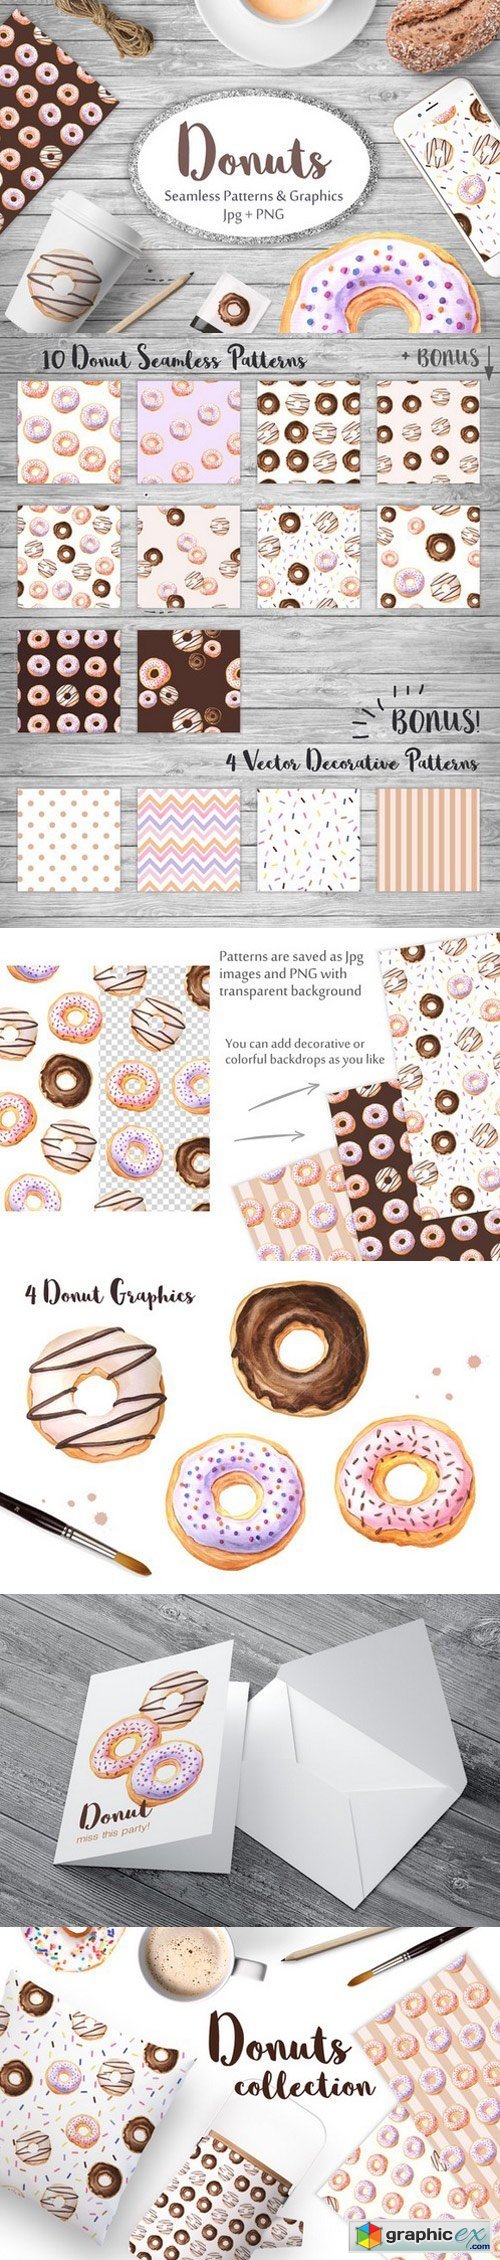 Watercolor Donuts Patterns&Graphics